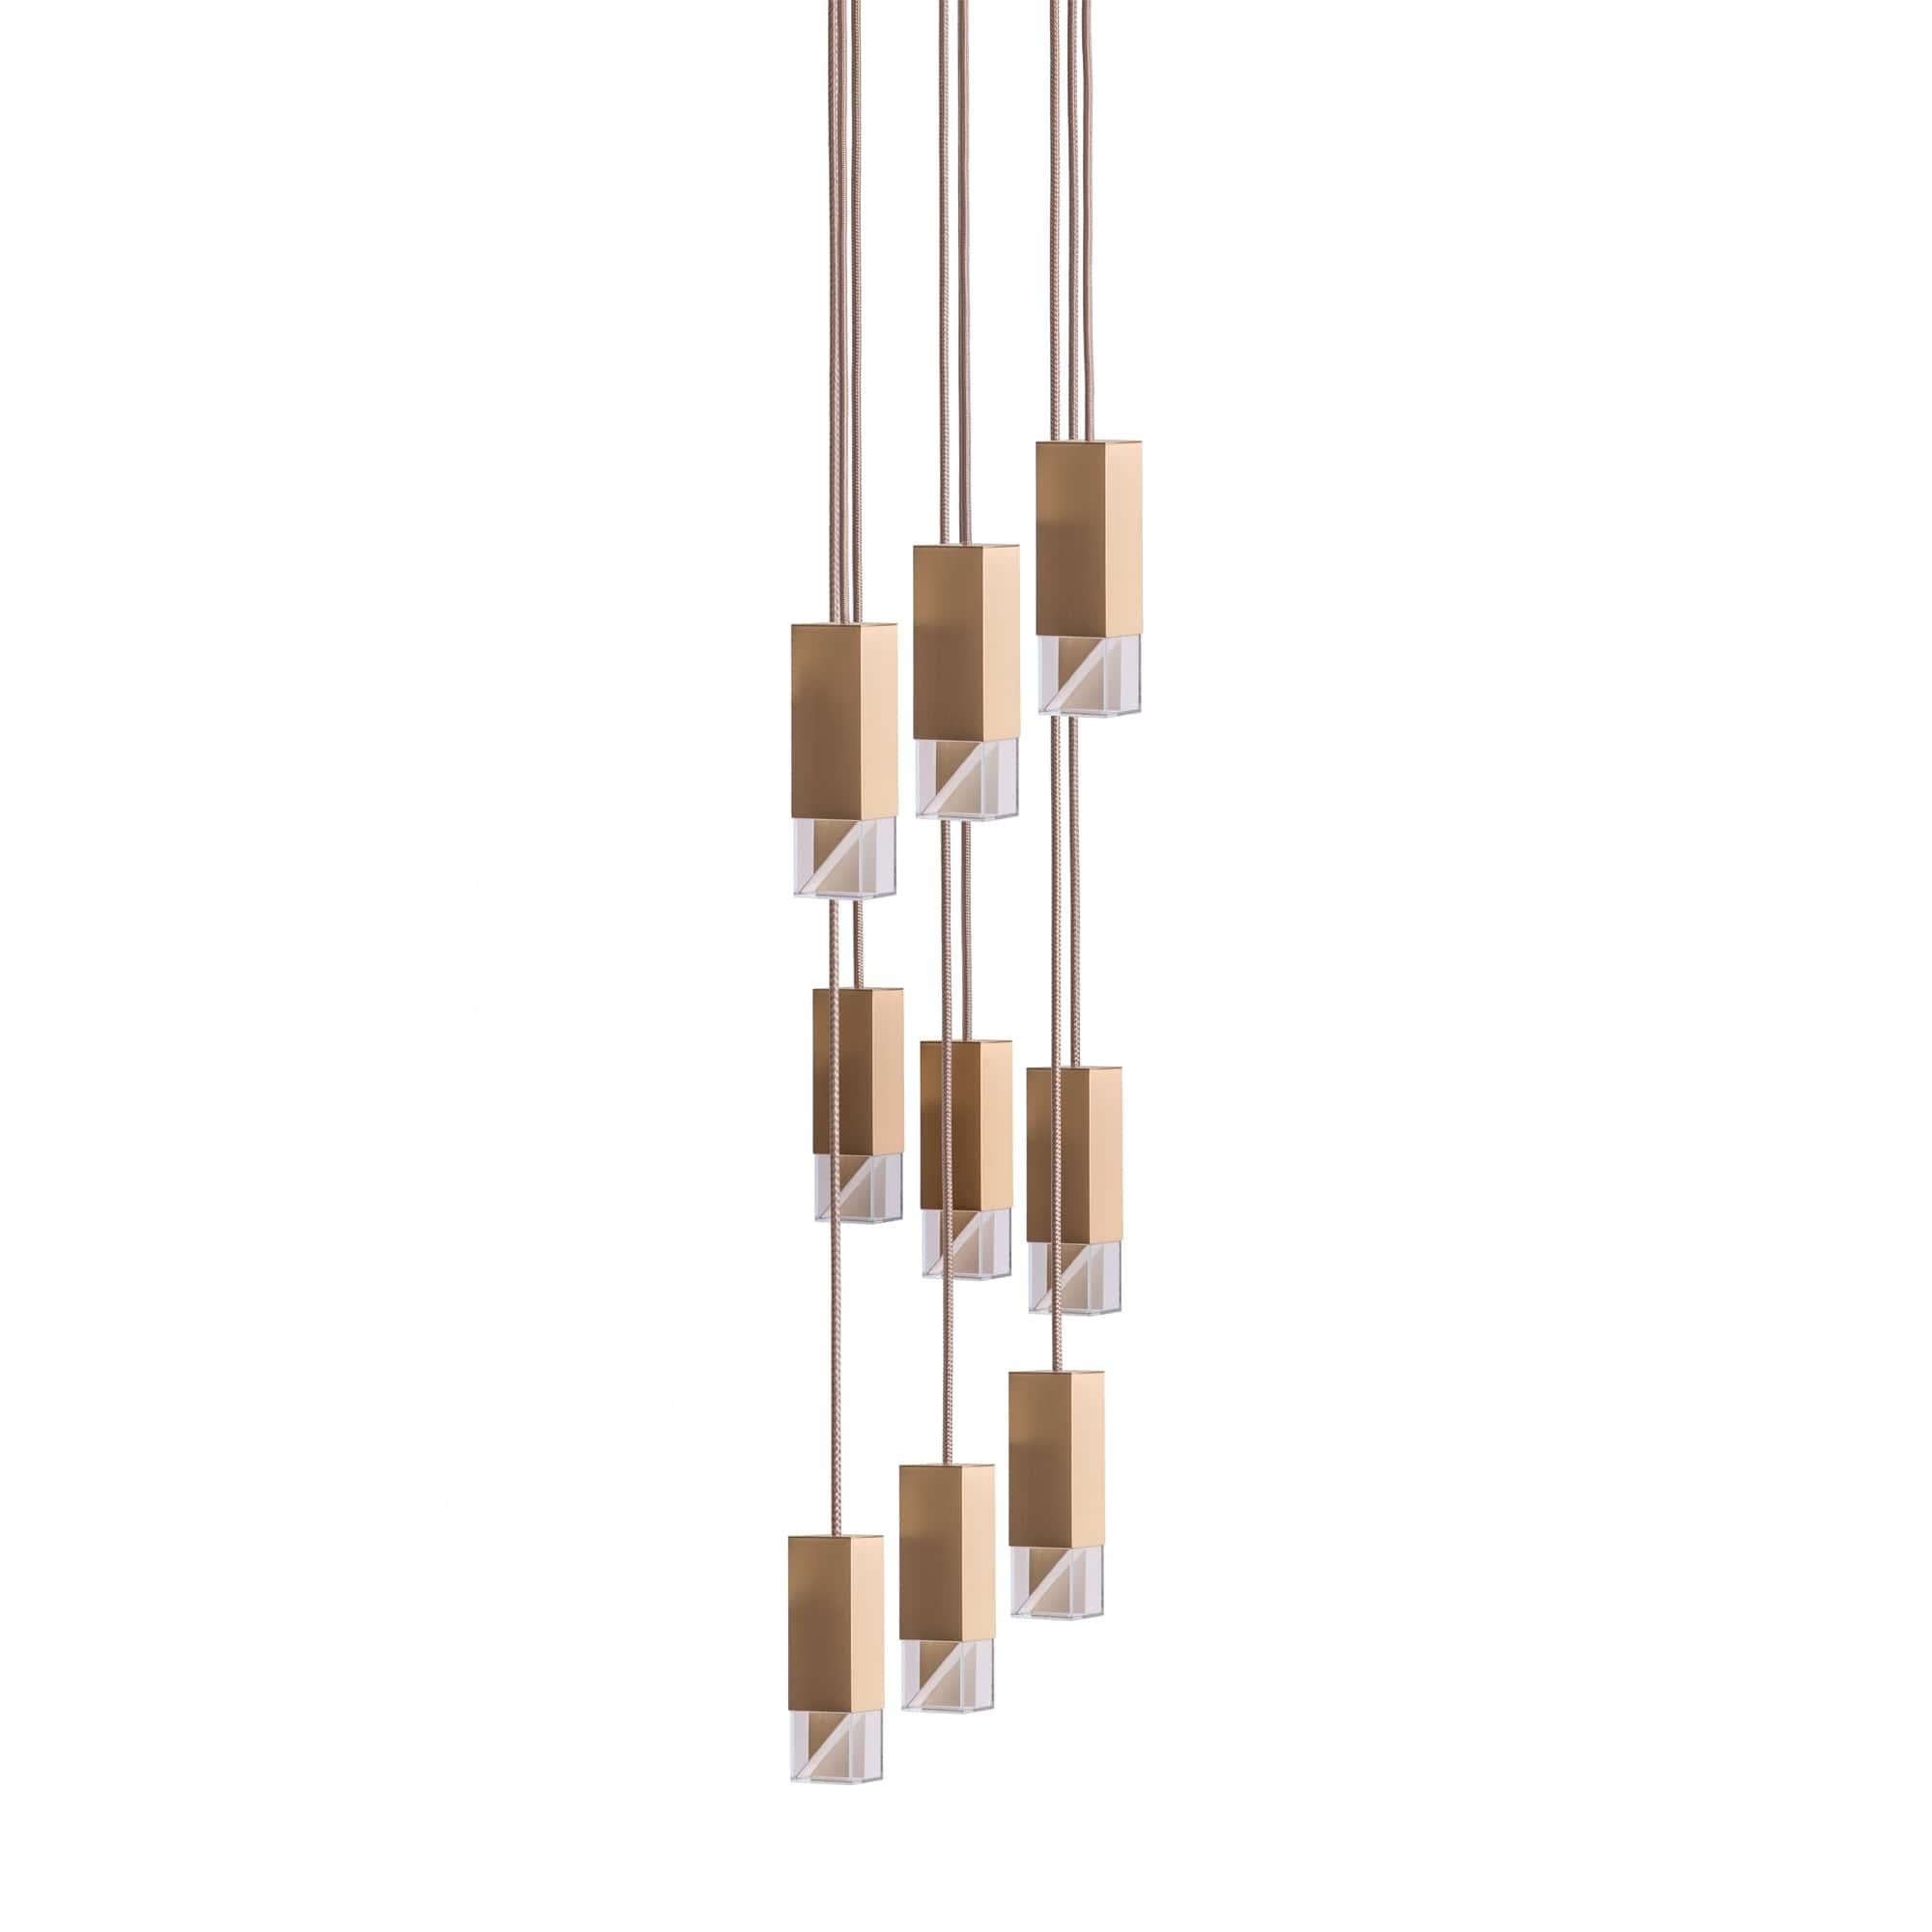 Lamp one 9-light chandelier in brass by Formaminima
Dimensions: H 111.9 x 30 x 30 cm
Materials: Lamp body in solid brass, Satin finish

Ultra-thin anti-reflection crystal diffuser
Inside-diffuser Limoges biscuit-finish porcelain sheets
Satin